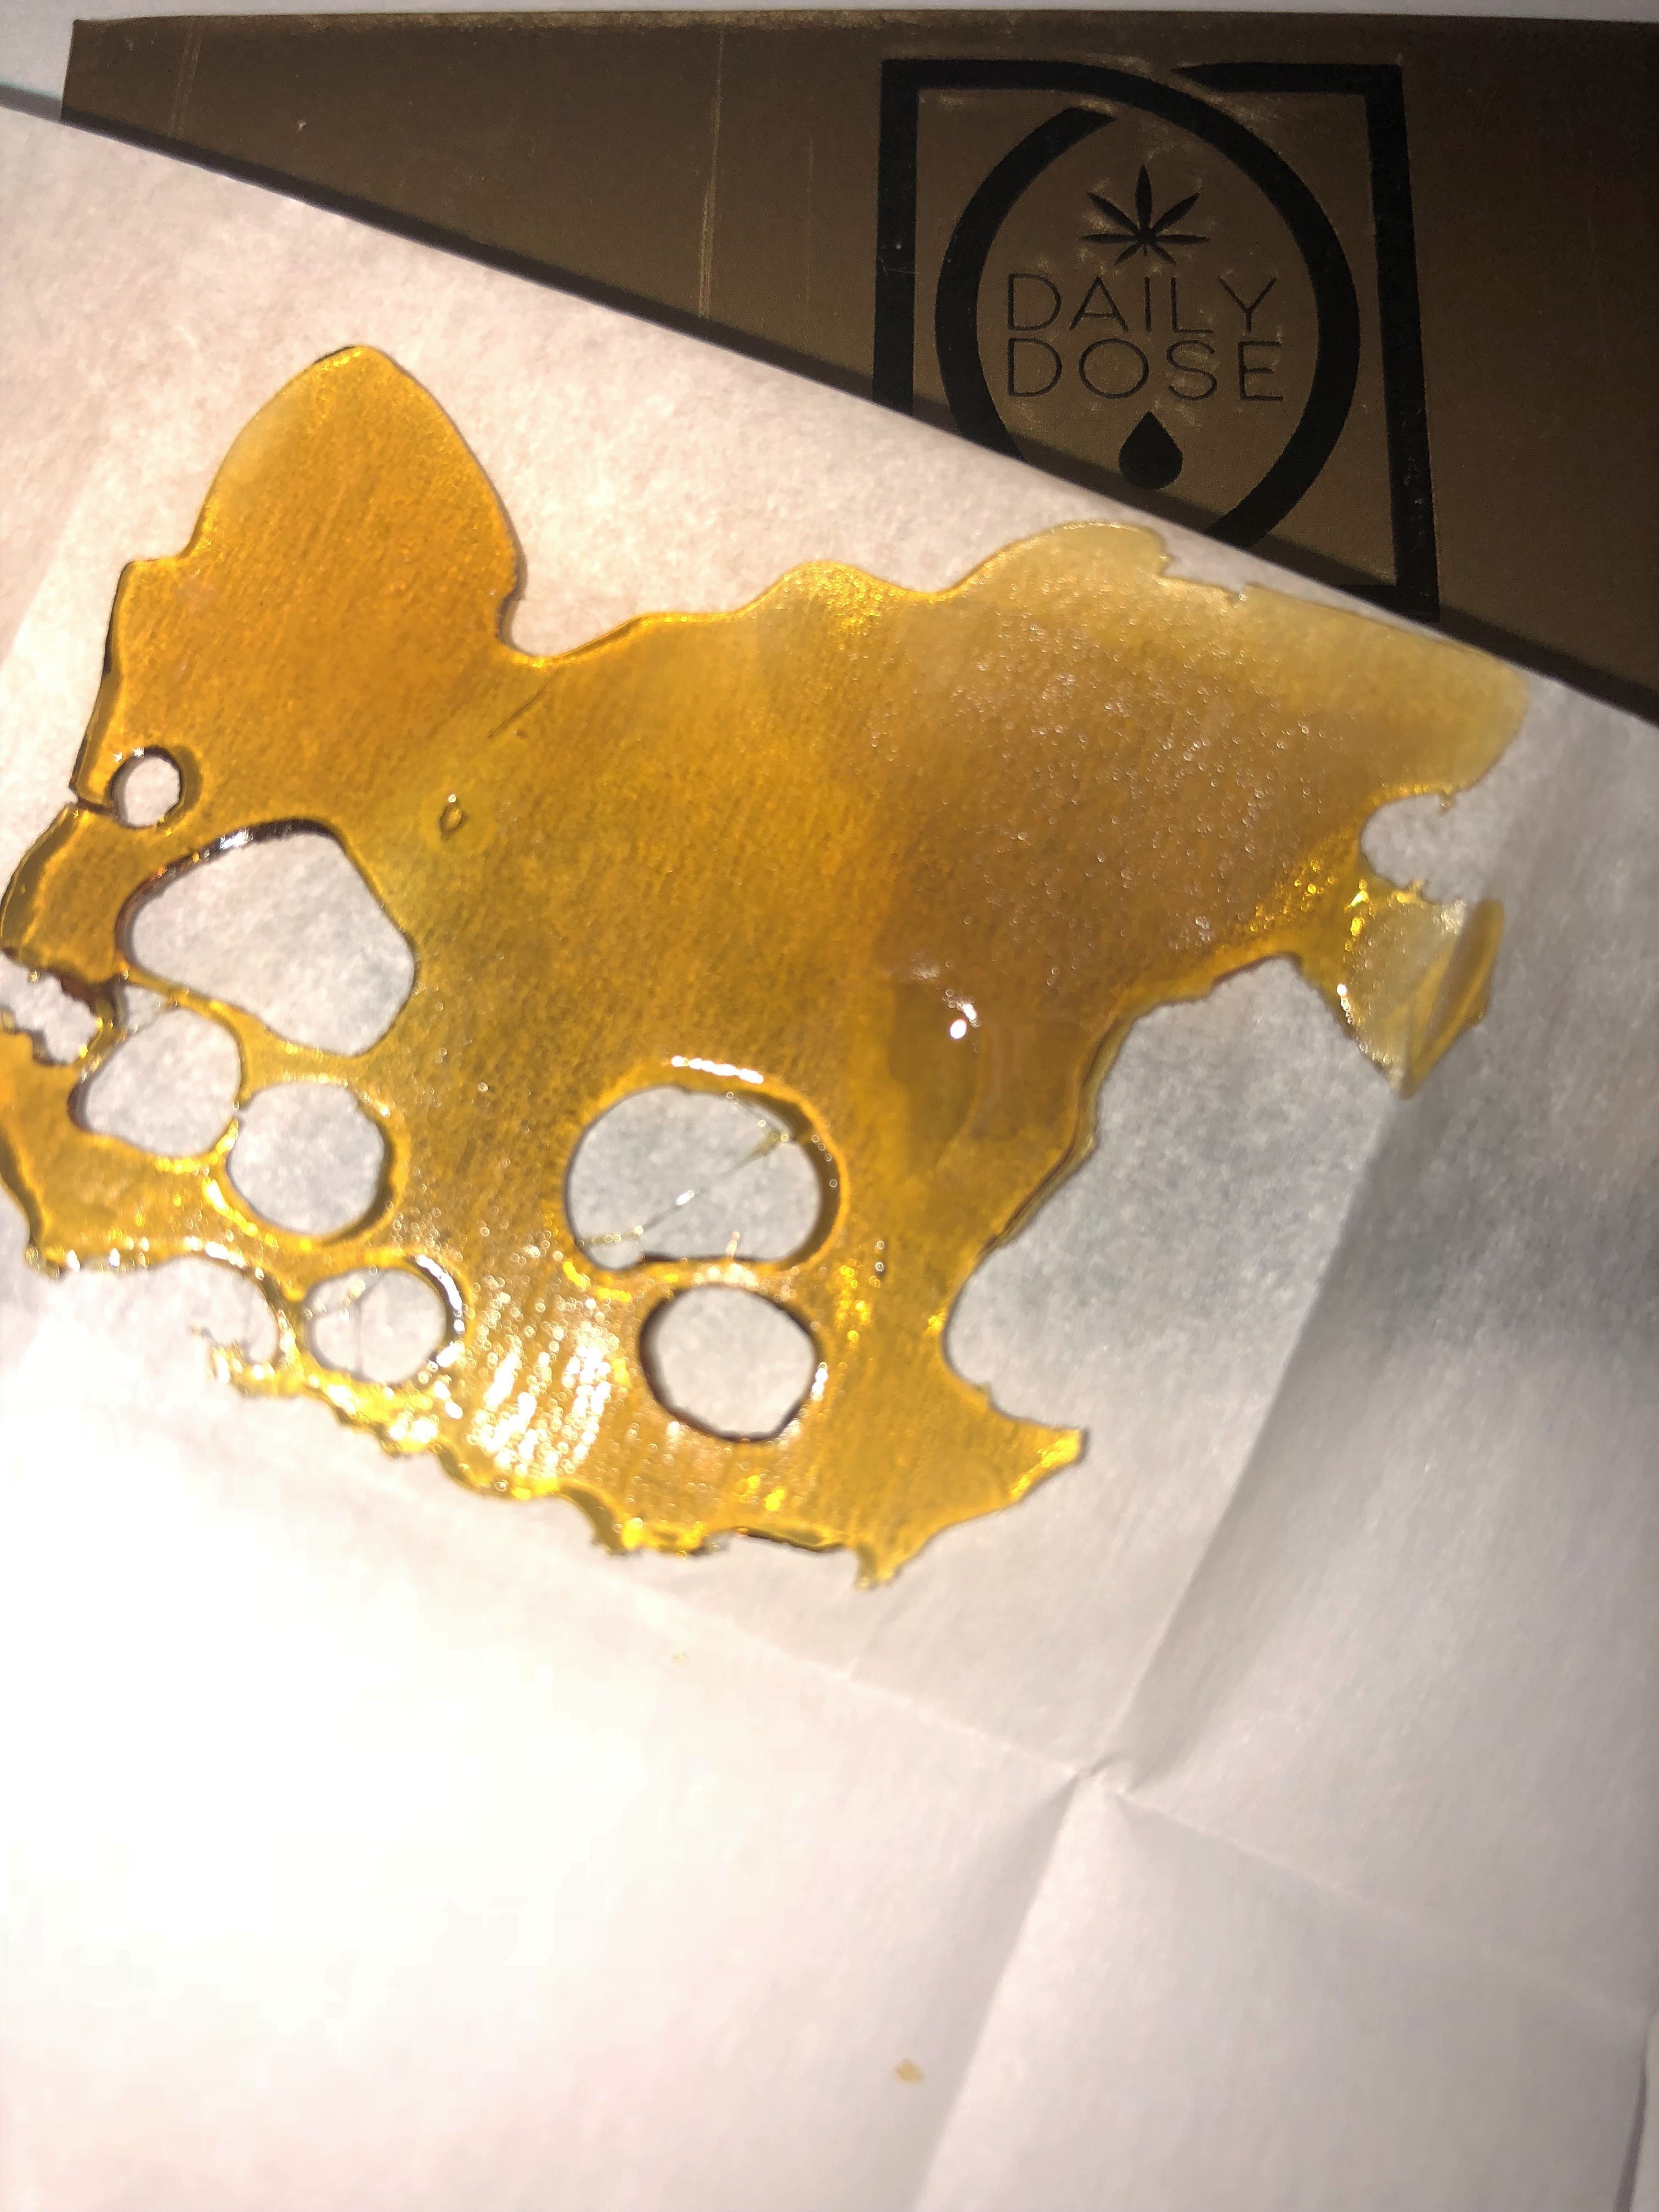 wax-daily-dose-extracts-king-louie-xii-shatter